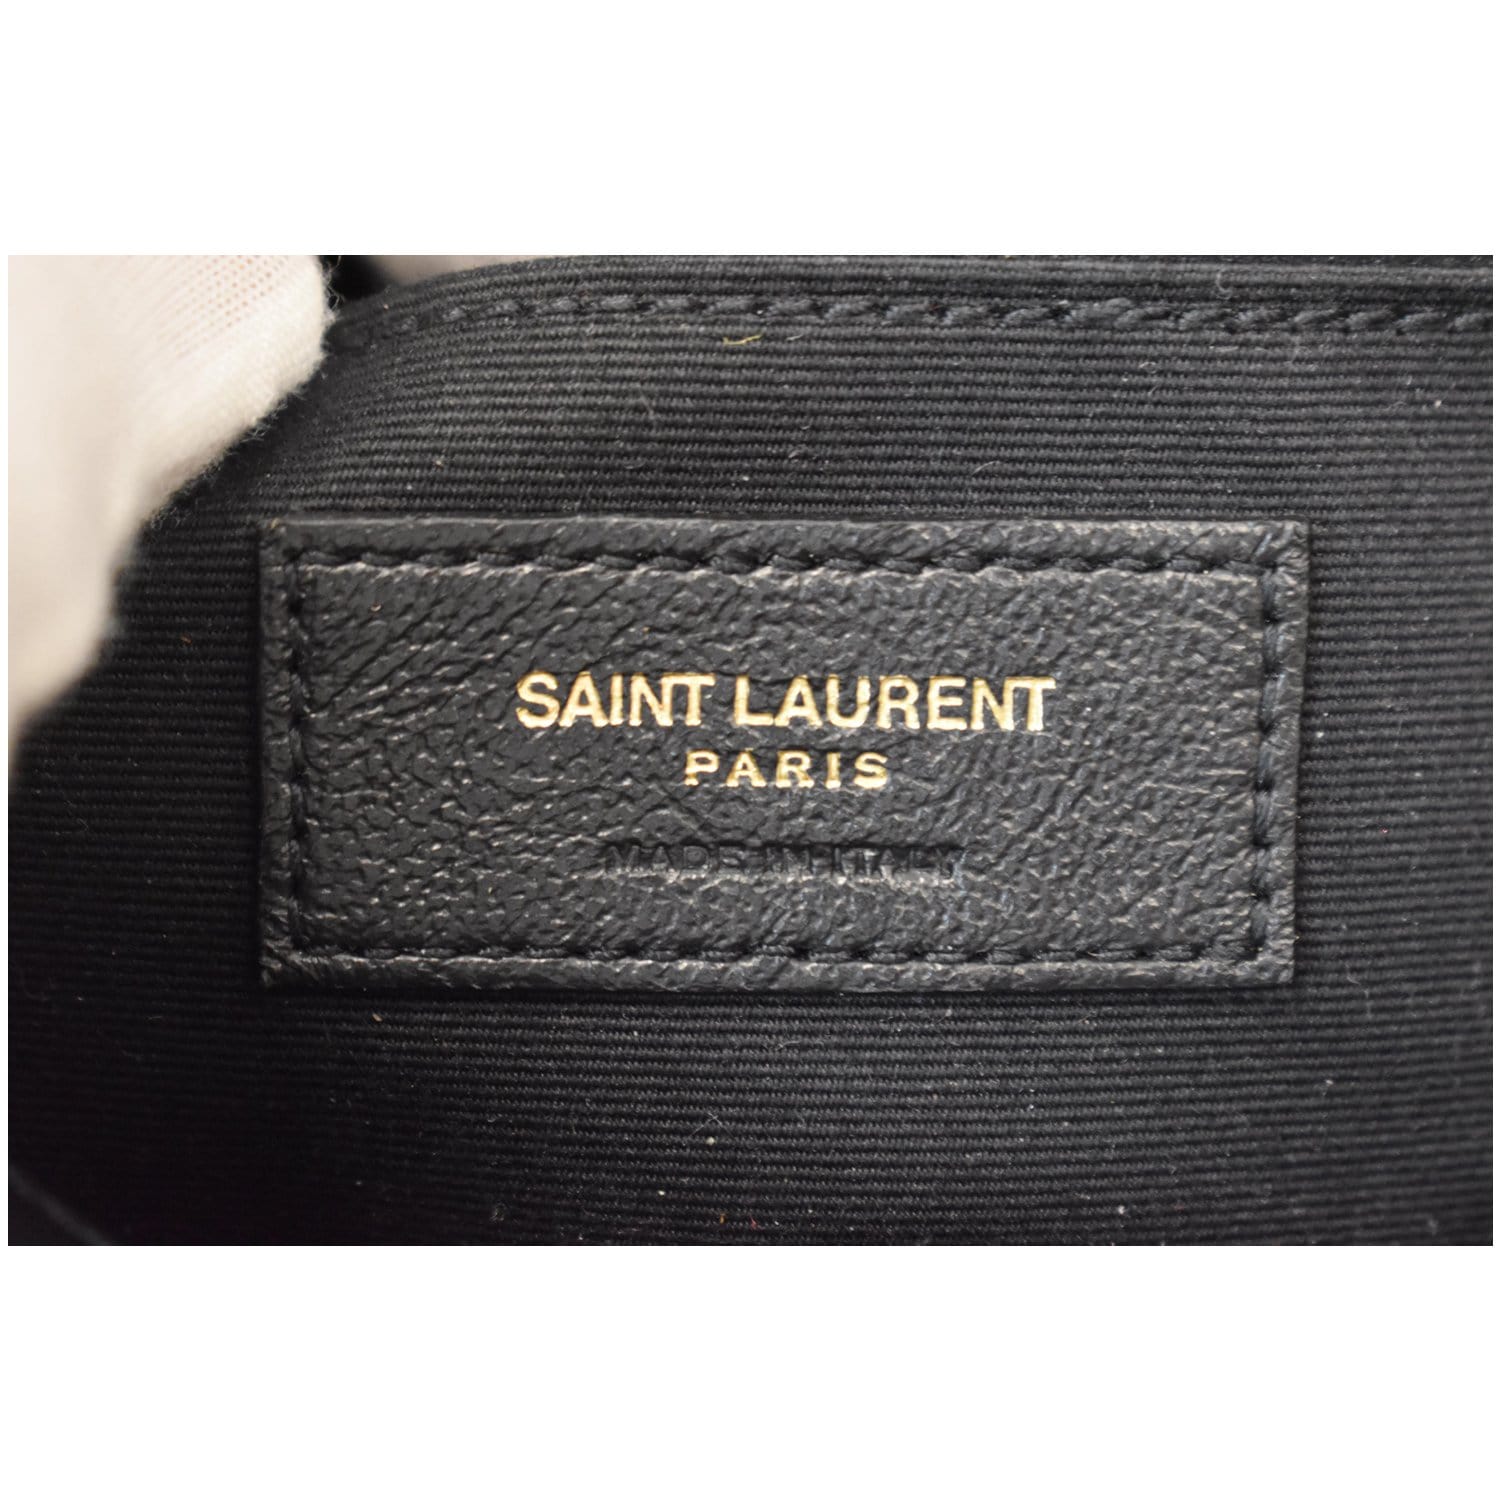 If You Want Quiet Luxury These Saint Laurent Bags Are It  Who What Wear UK